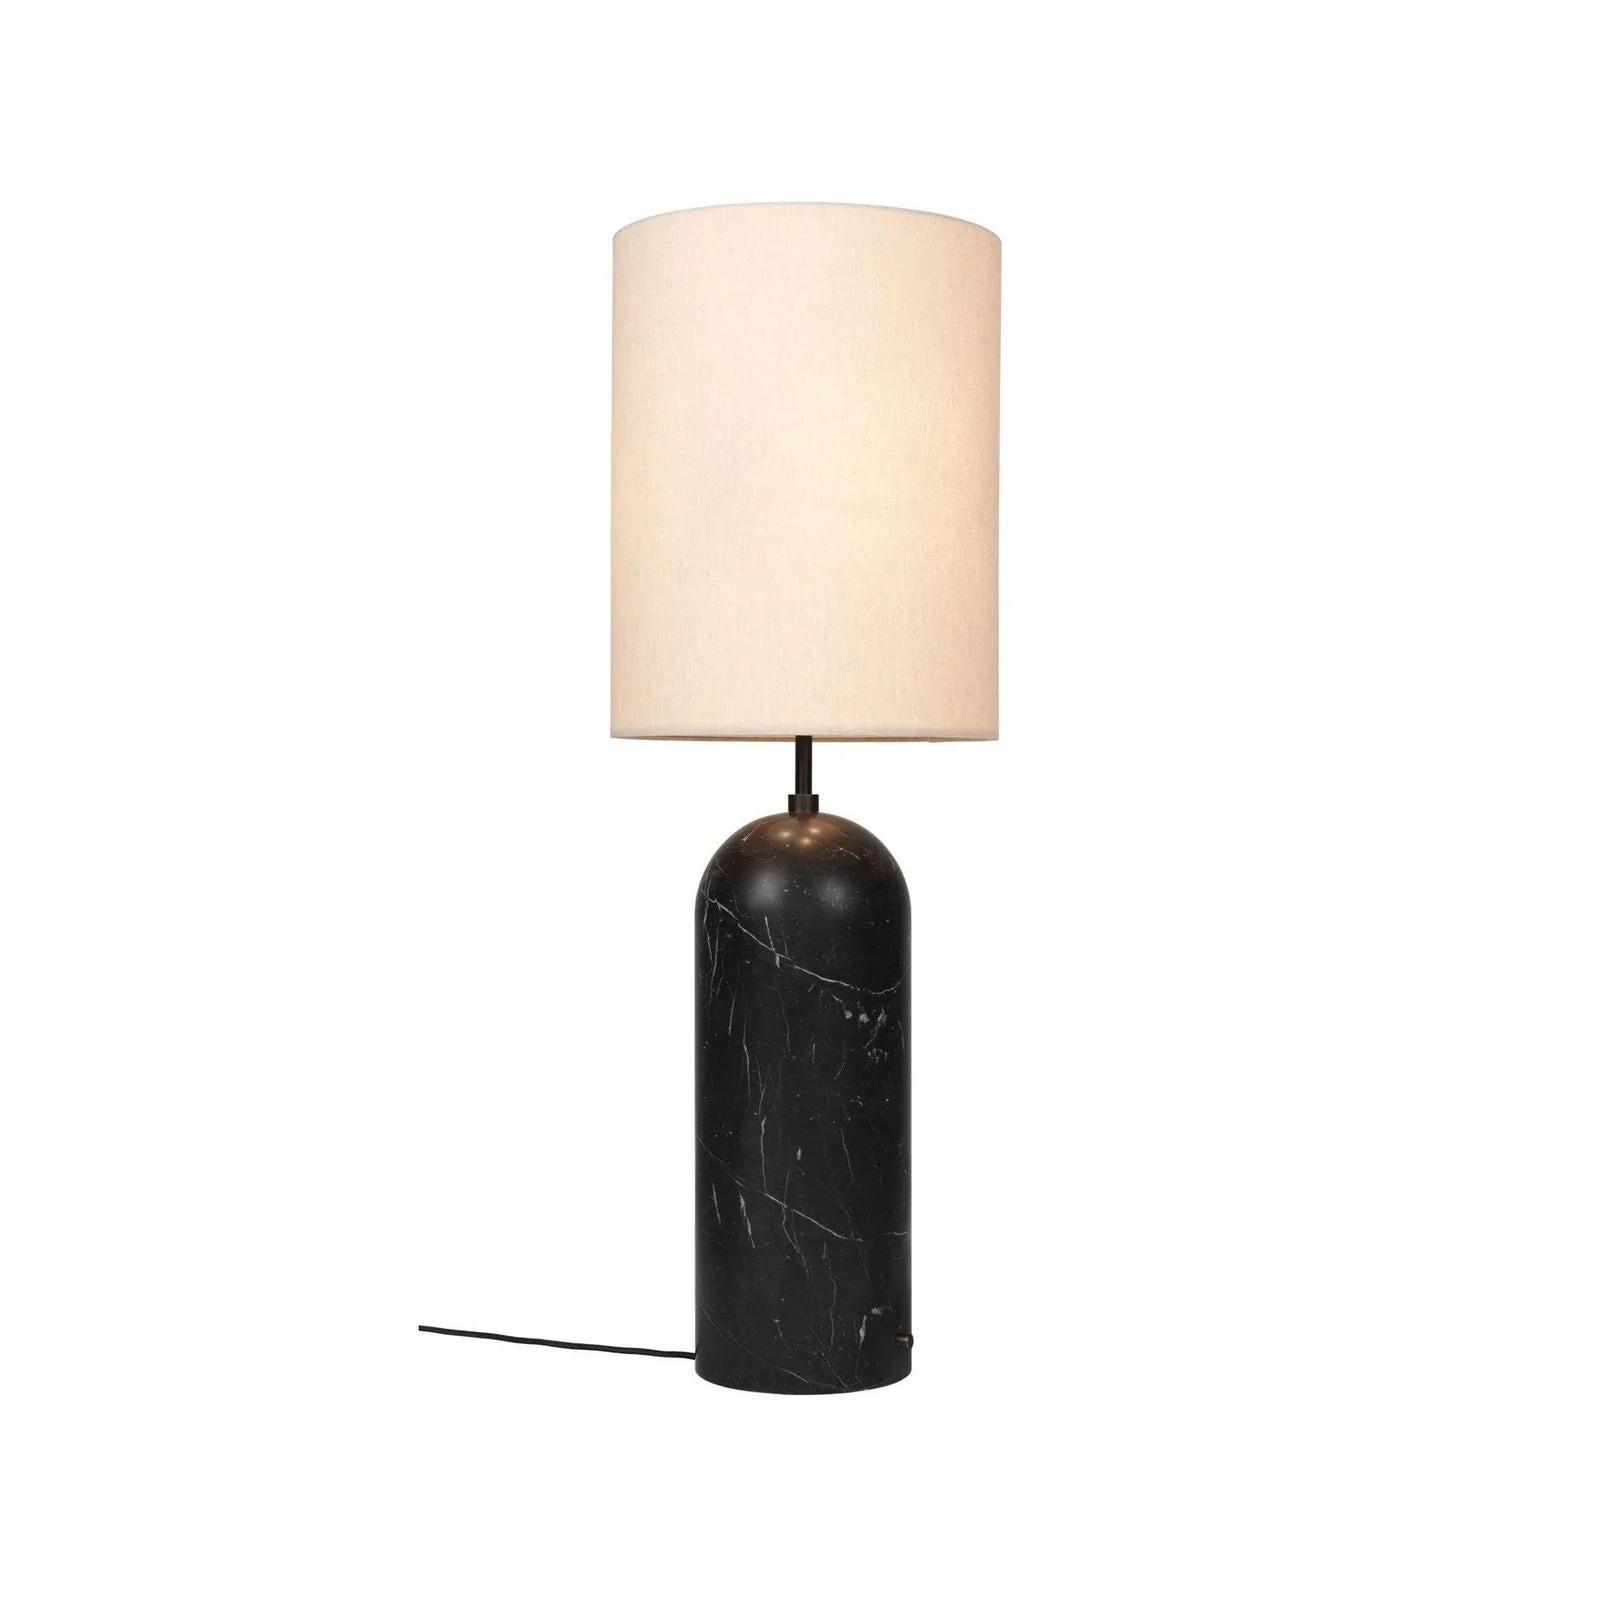 Powder-Coated Gravity Floor Lamp - XL High, Black Marble, Canvas For Sale